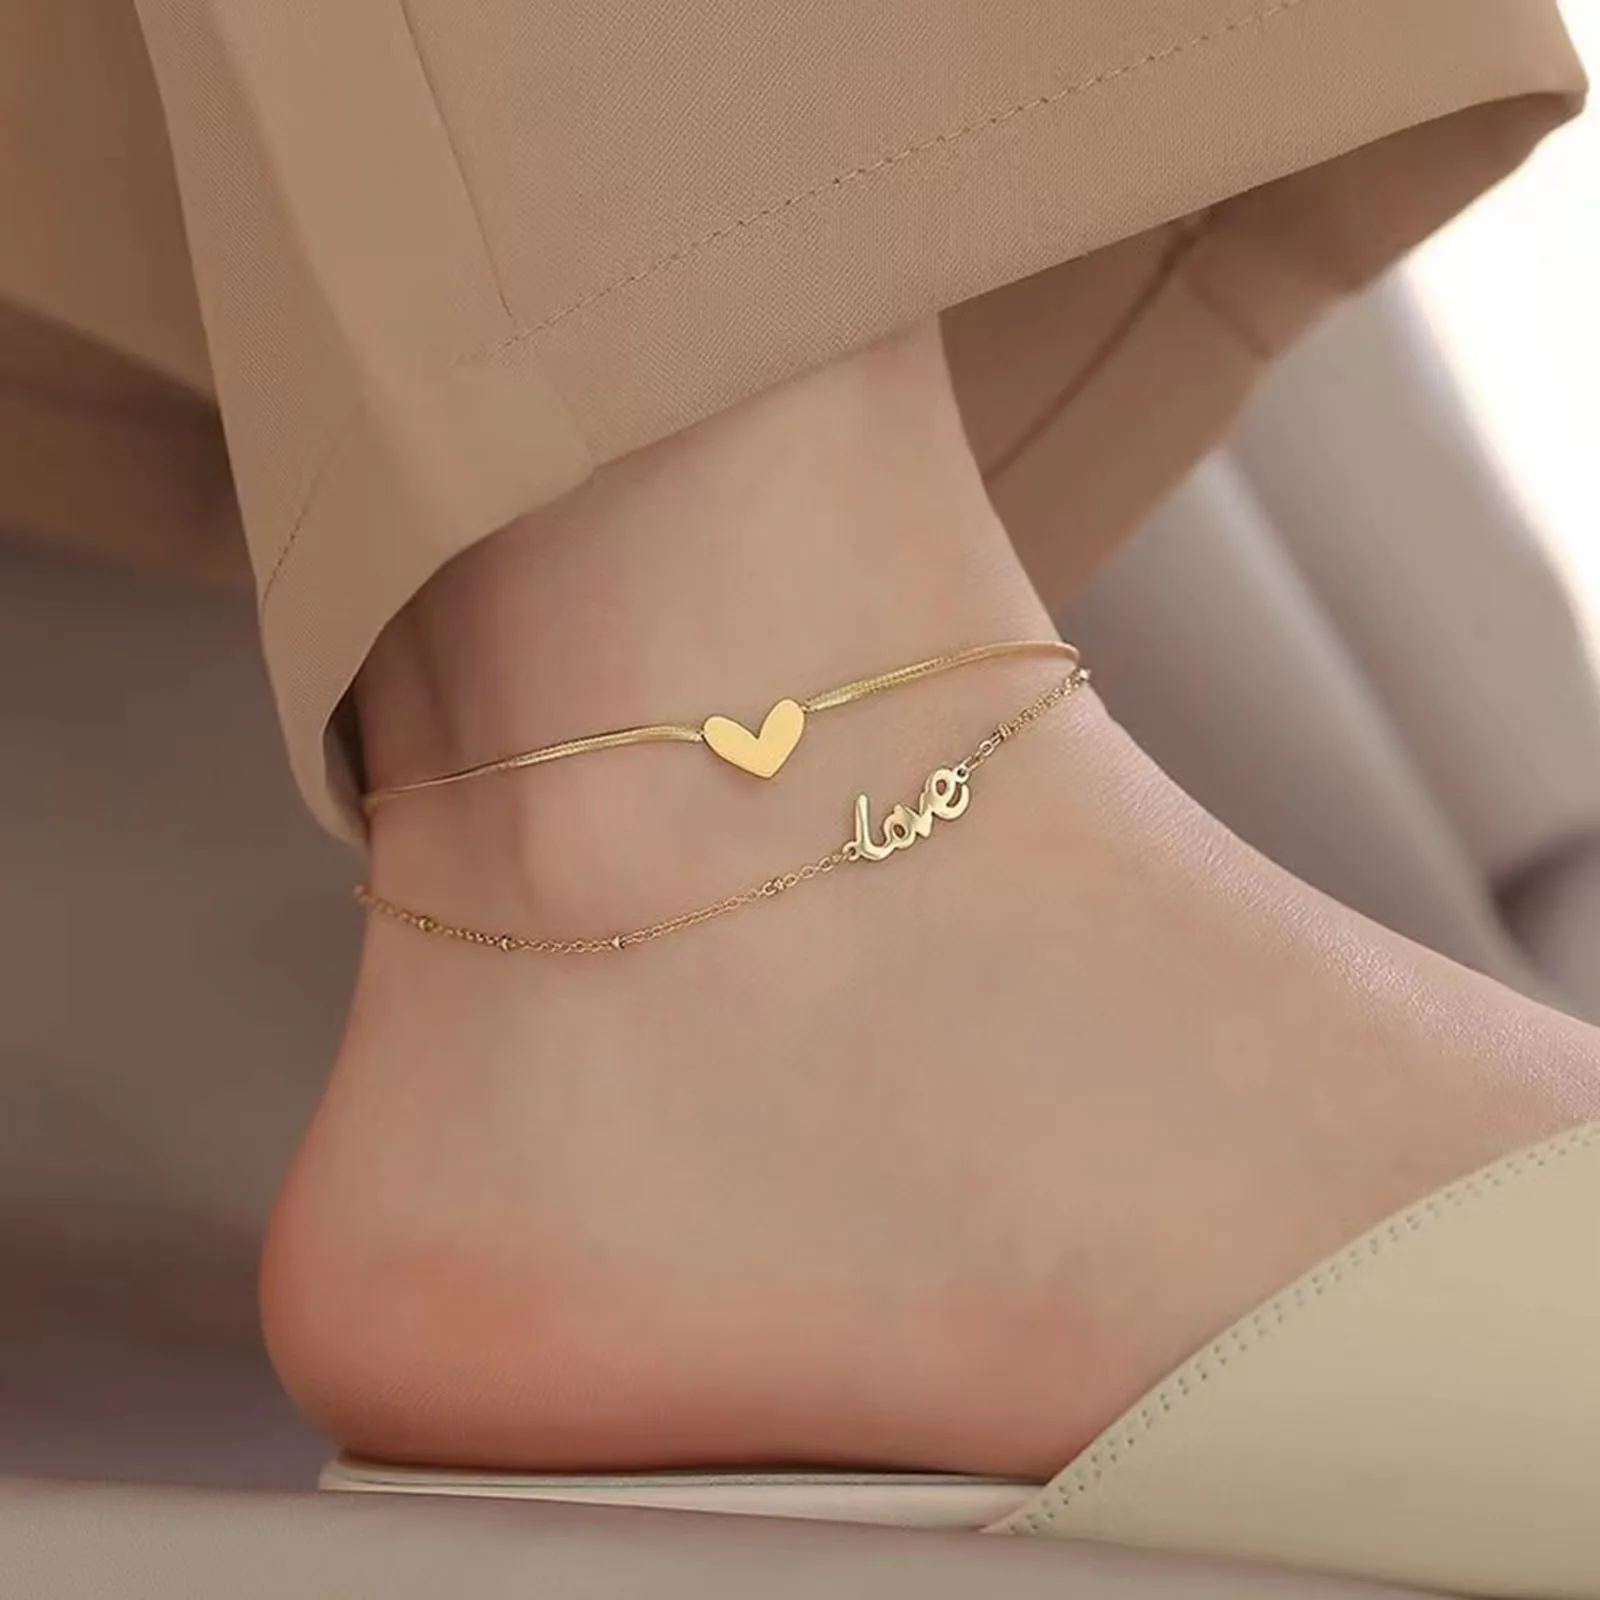 

Stainless Steel Link Chain Multilayer Layered Anklet Gold Color Heart "LOVE" On Foot Ankle Bracelets For Women Leg Chain Jewelry